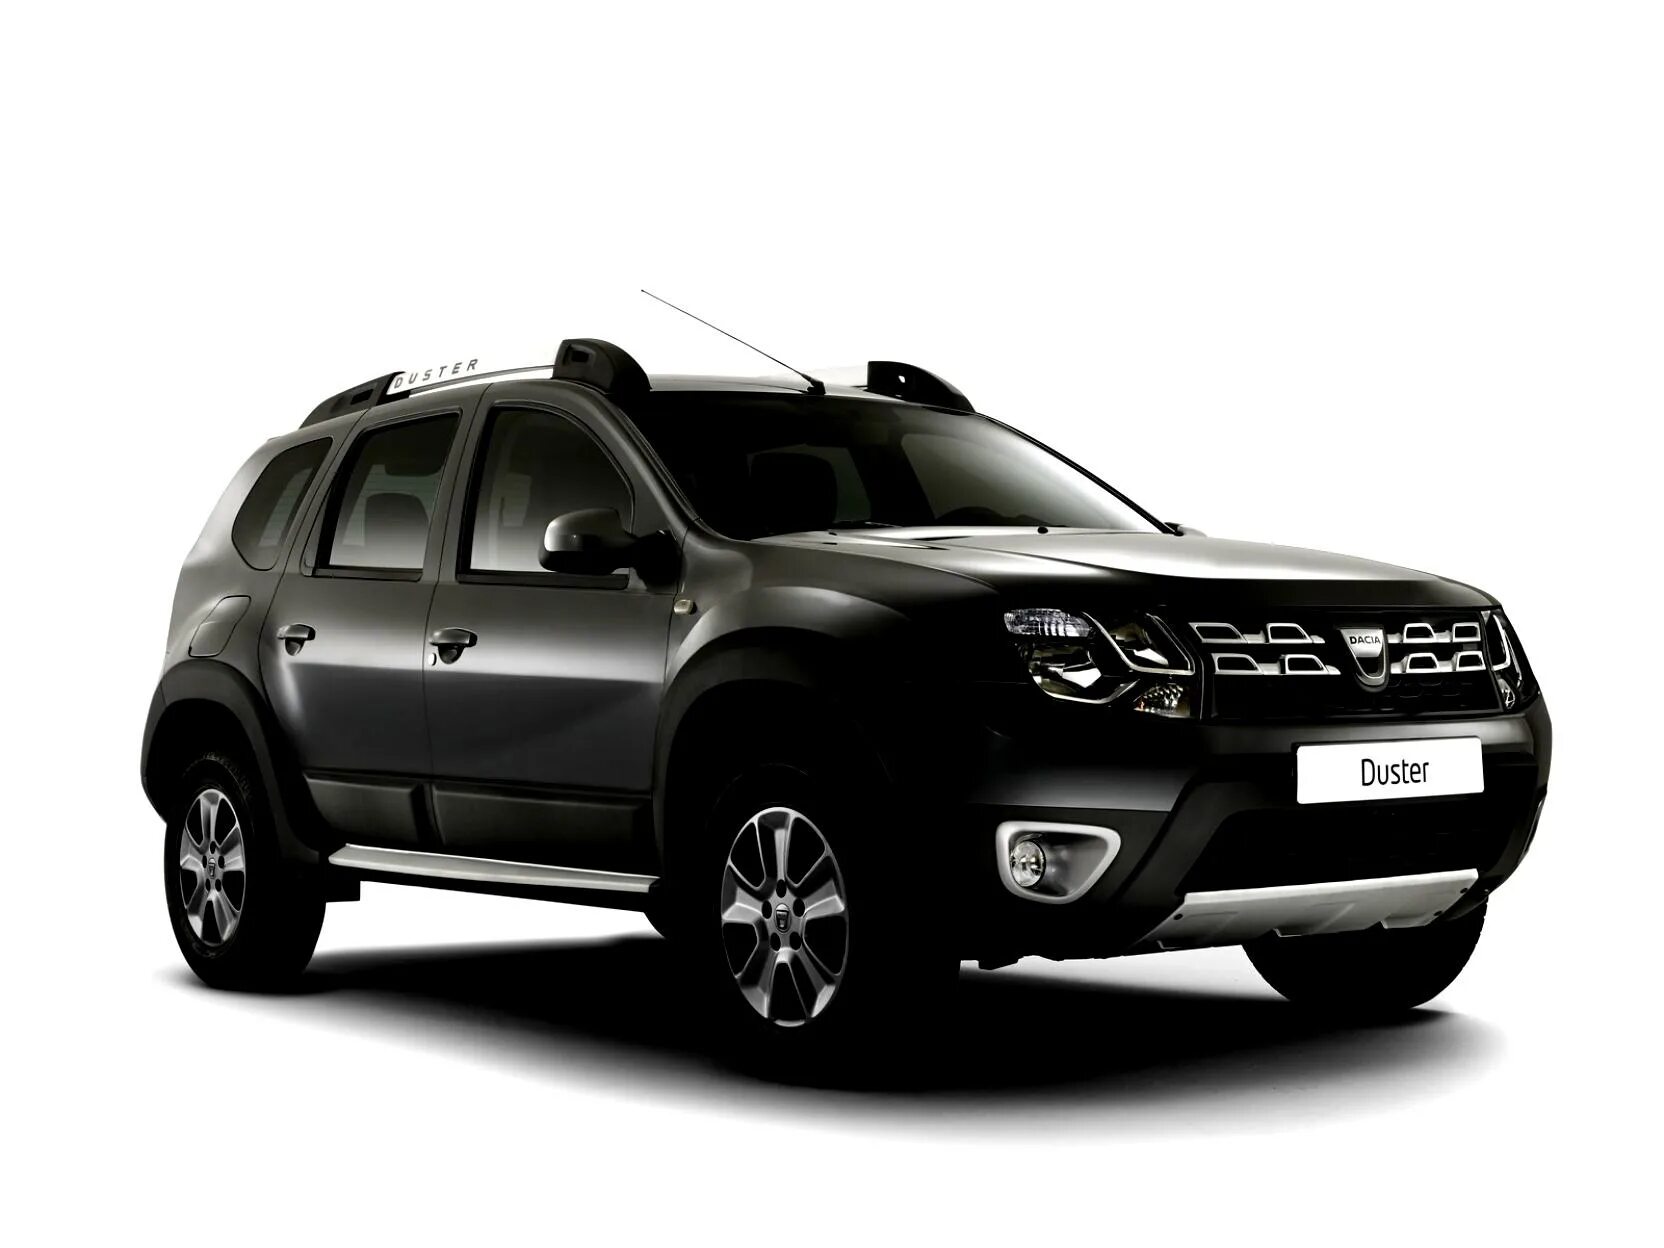 Renault Duster 2013. Рено Duster 2013. Dacia Duster. Рено Duster Duster 2013. Дастер купить татарстан